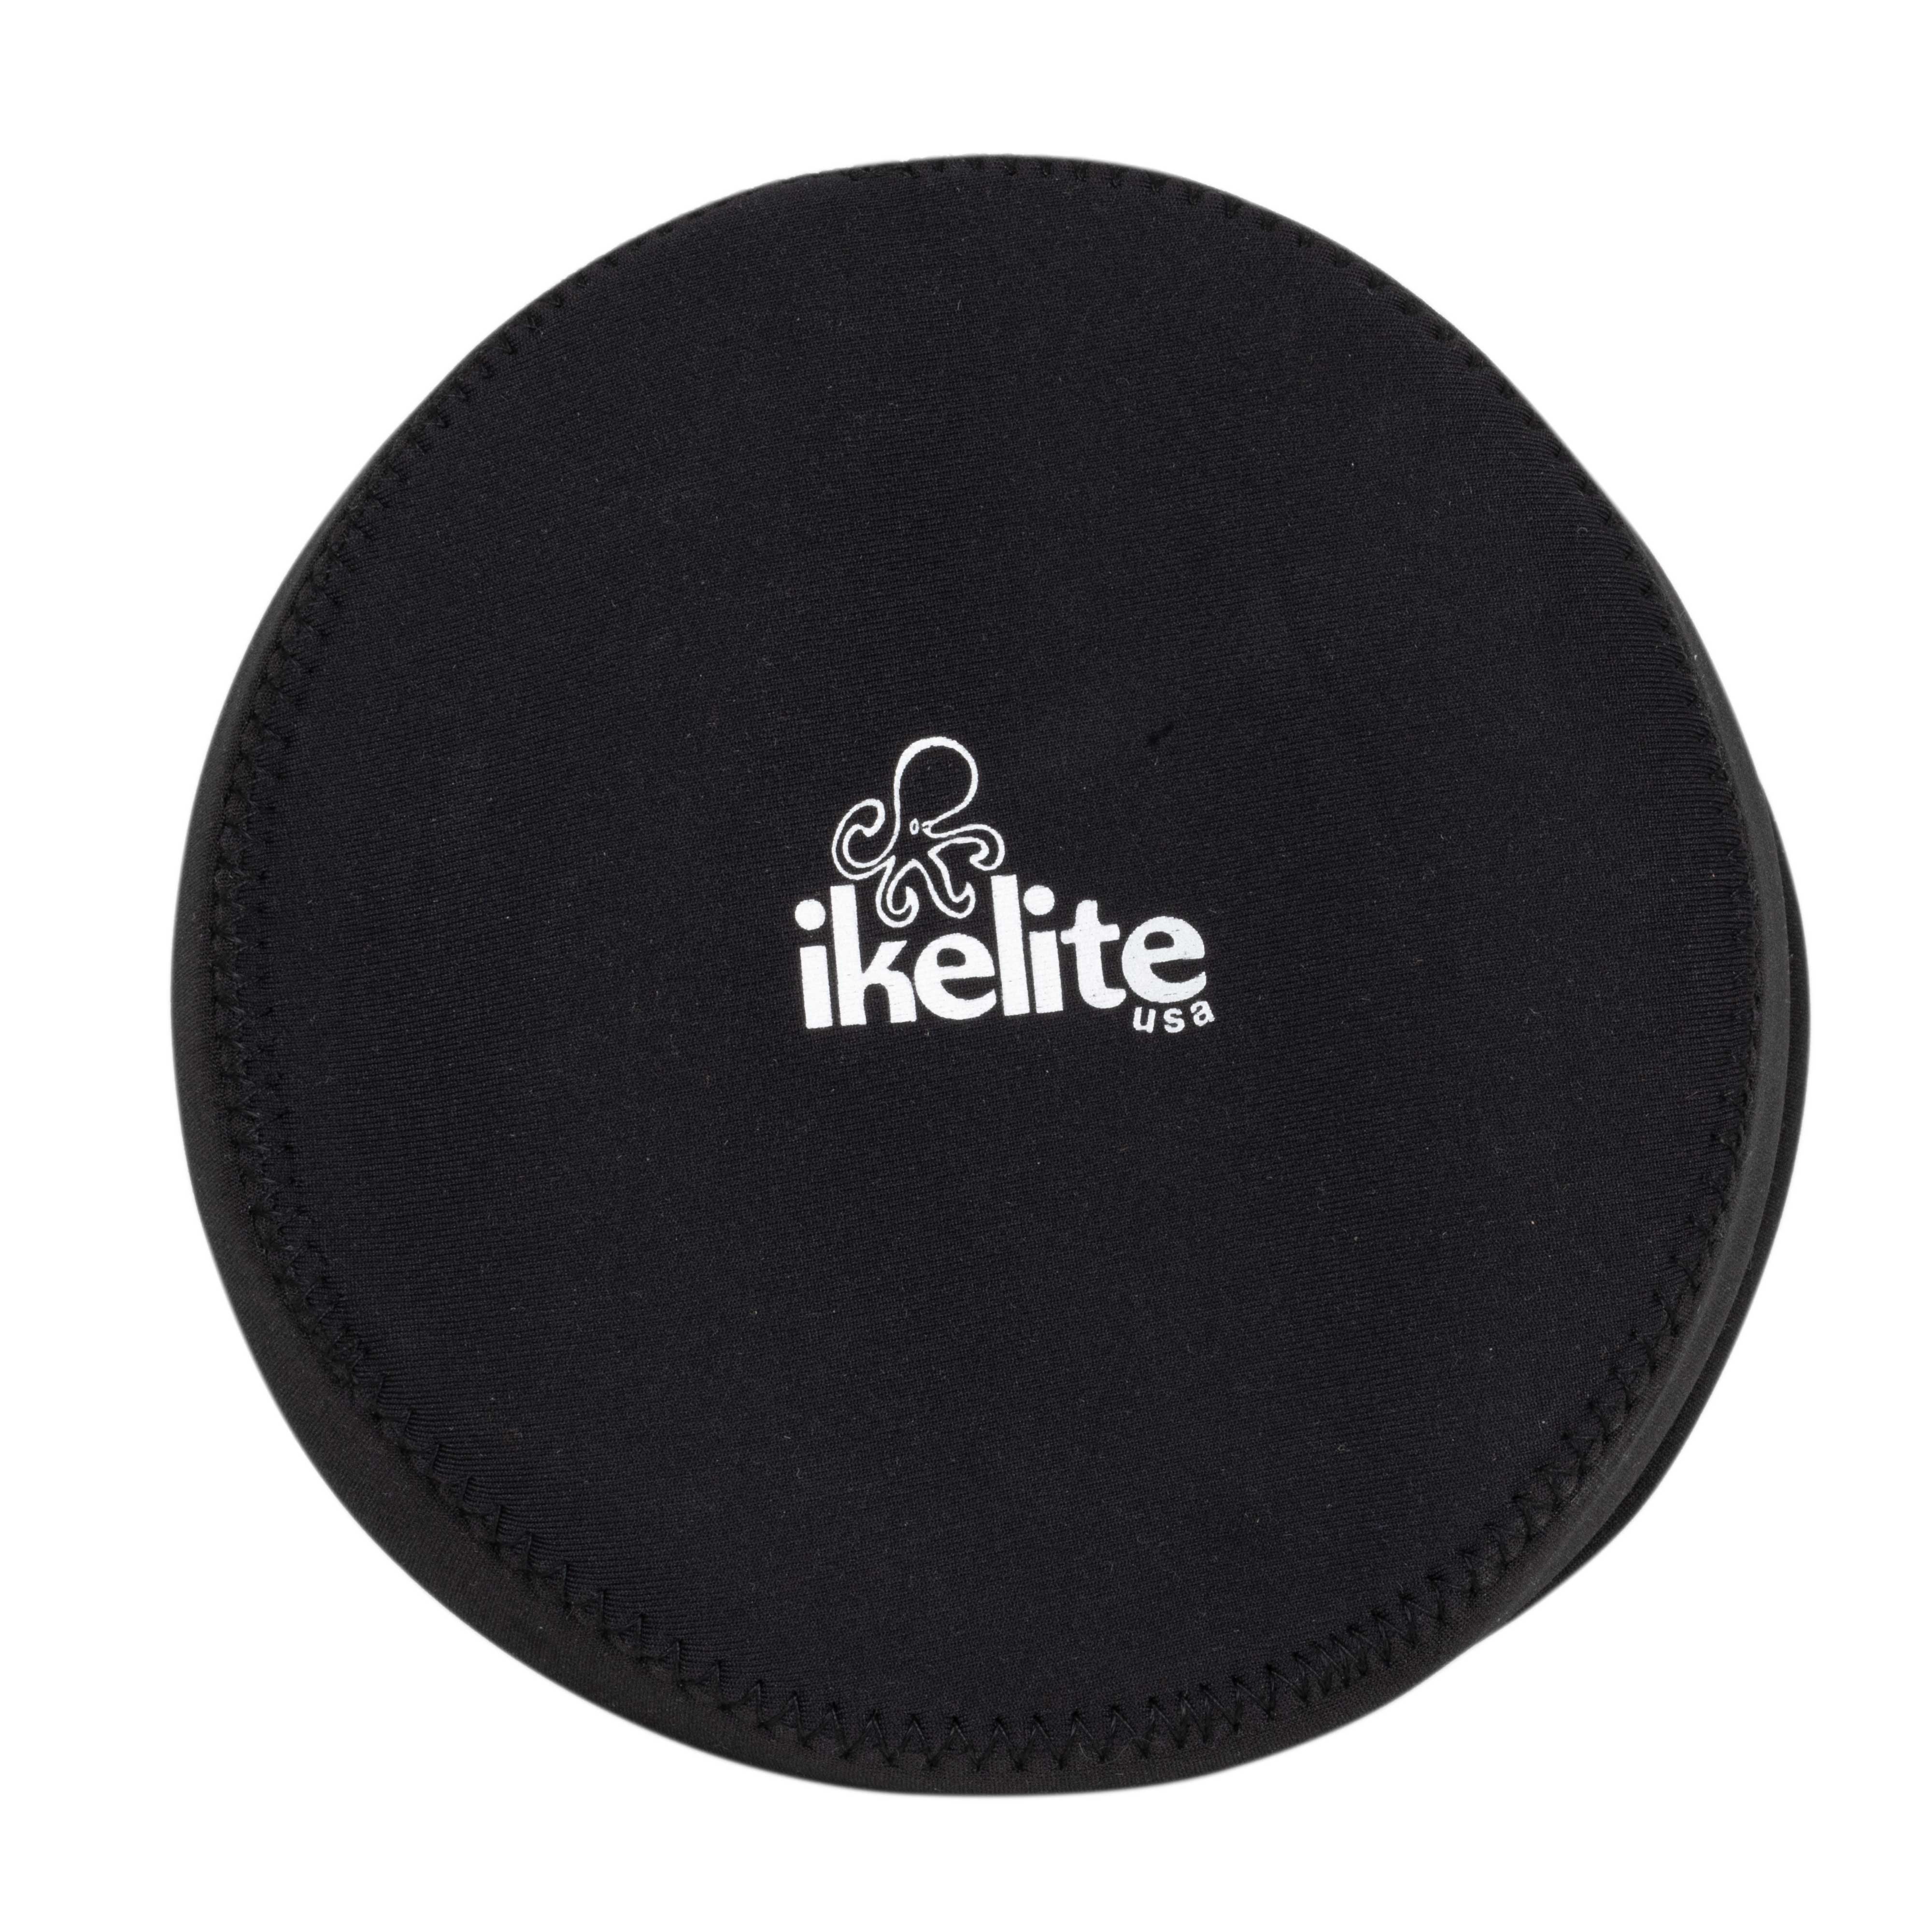 Ikelite Neoprene Cover for DL Compact 8 inch Dome Port